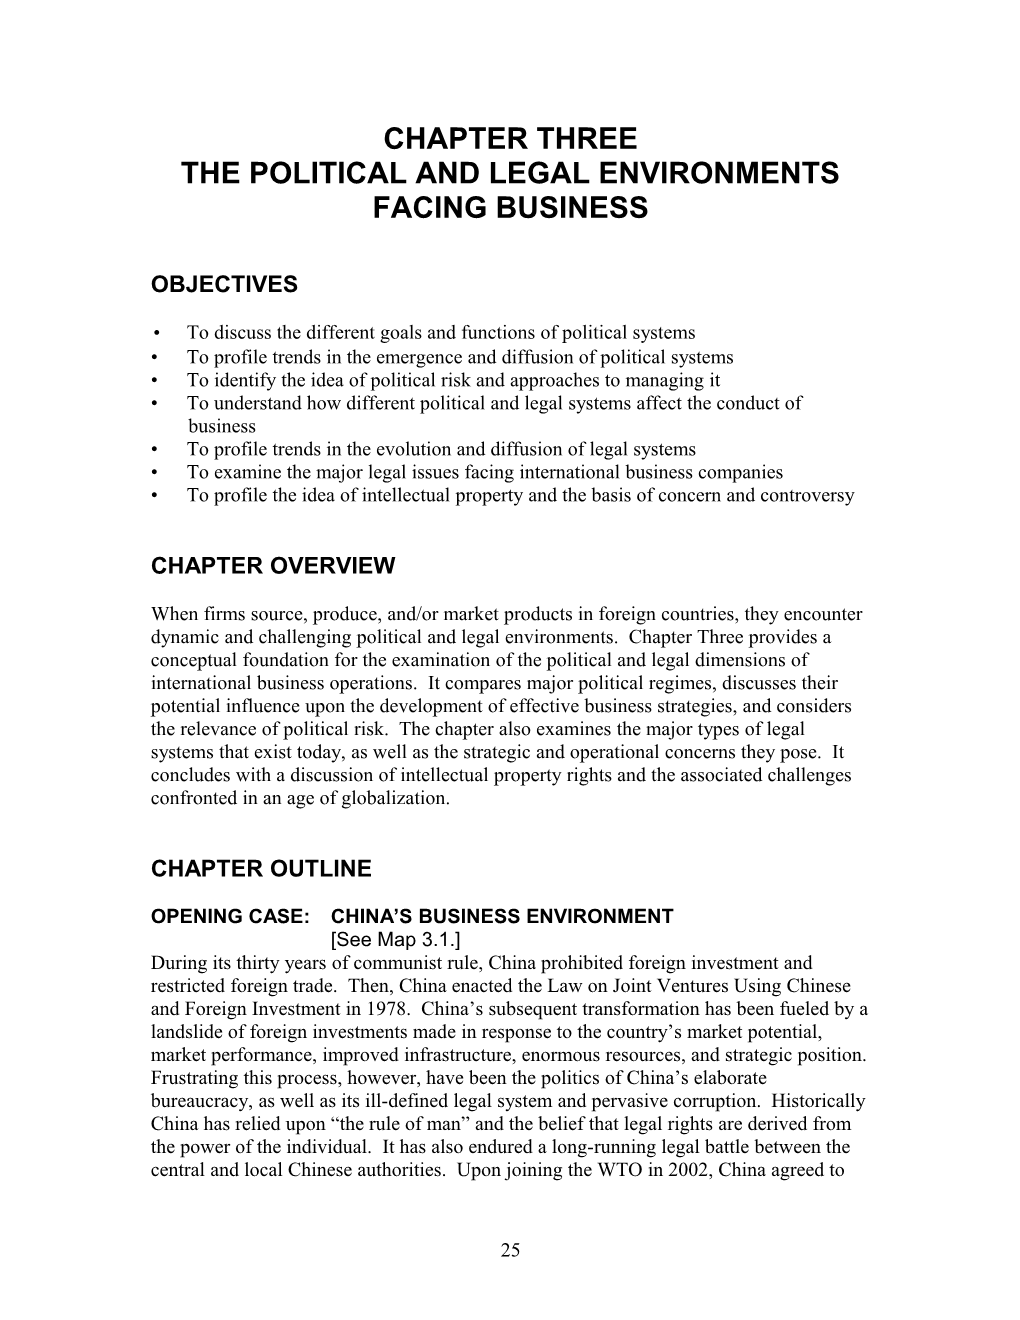 The Political and Legal Environments Facing Business